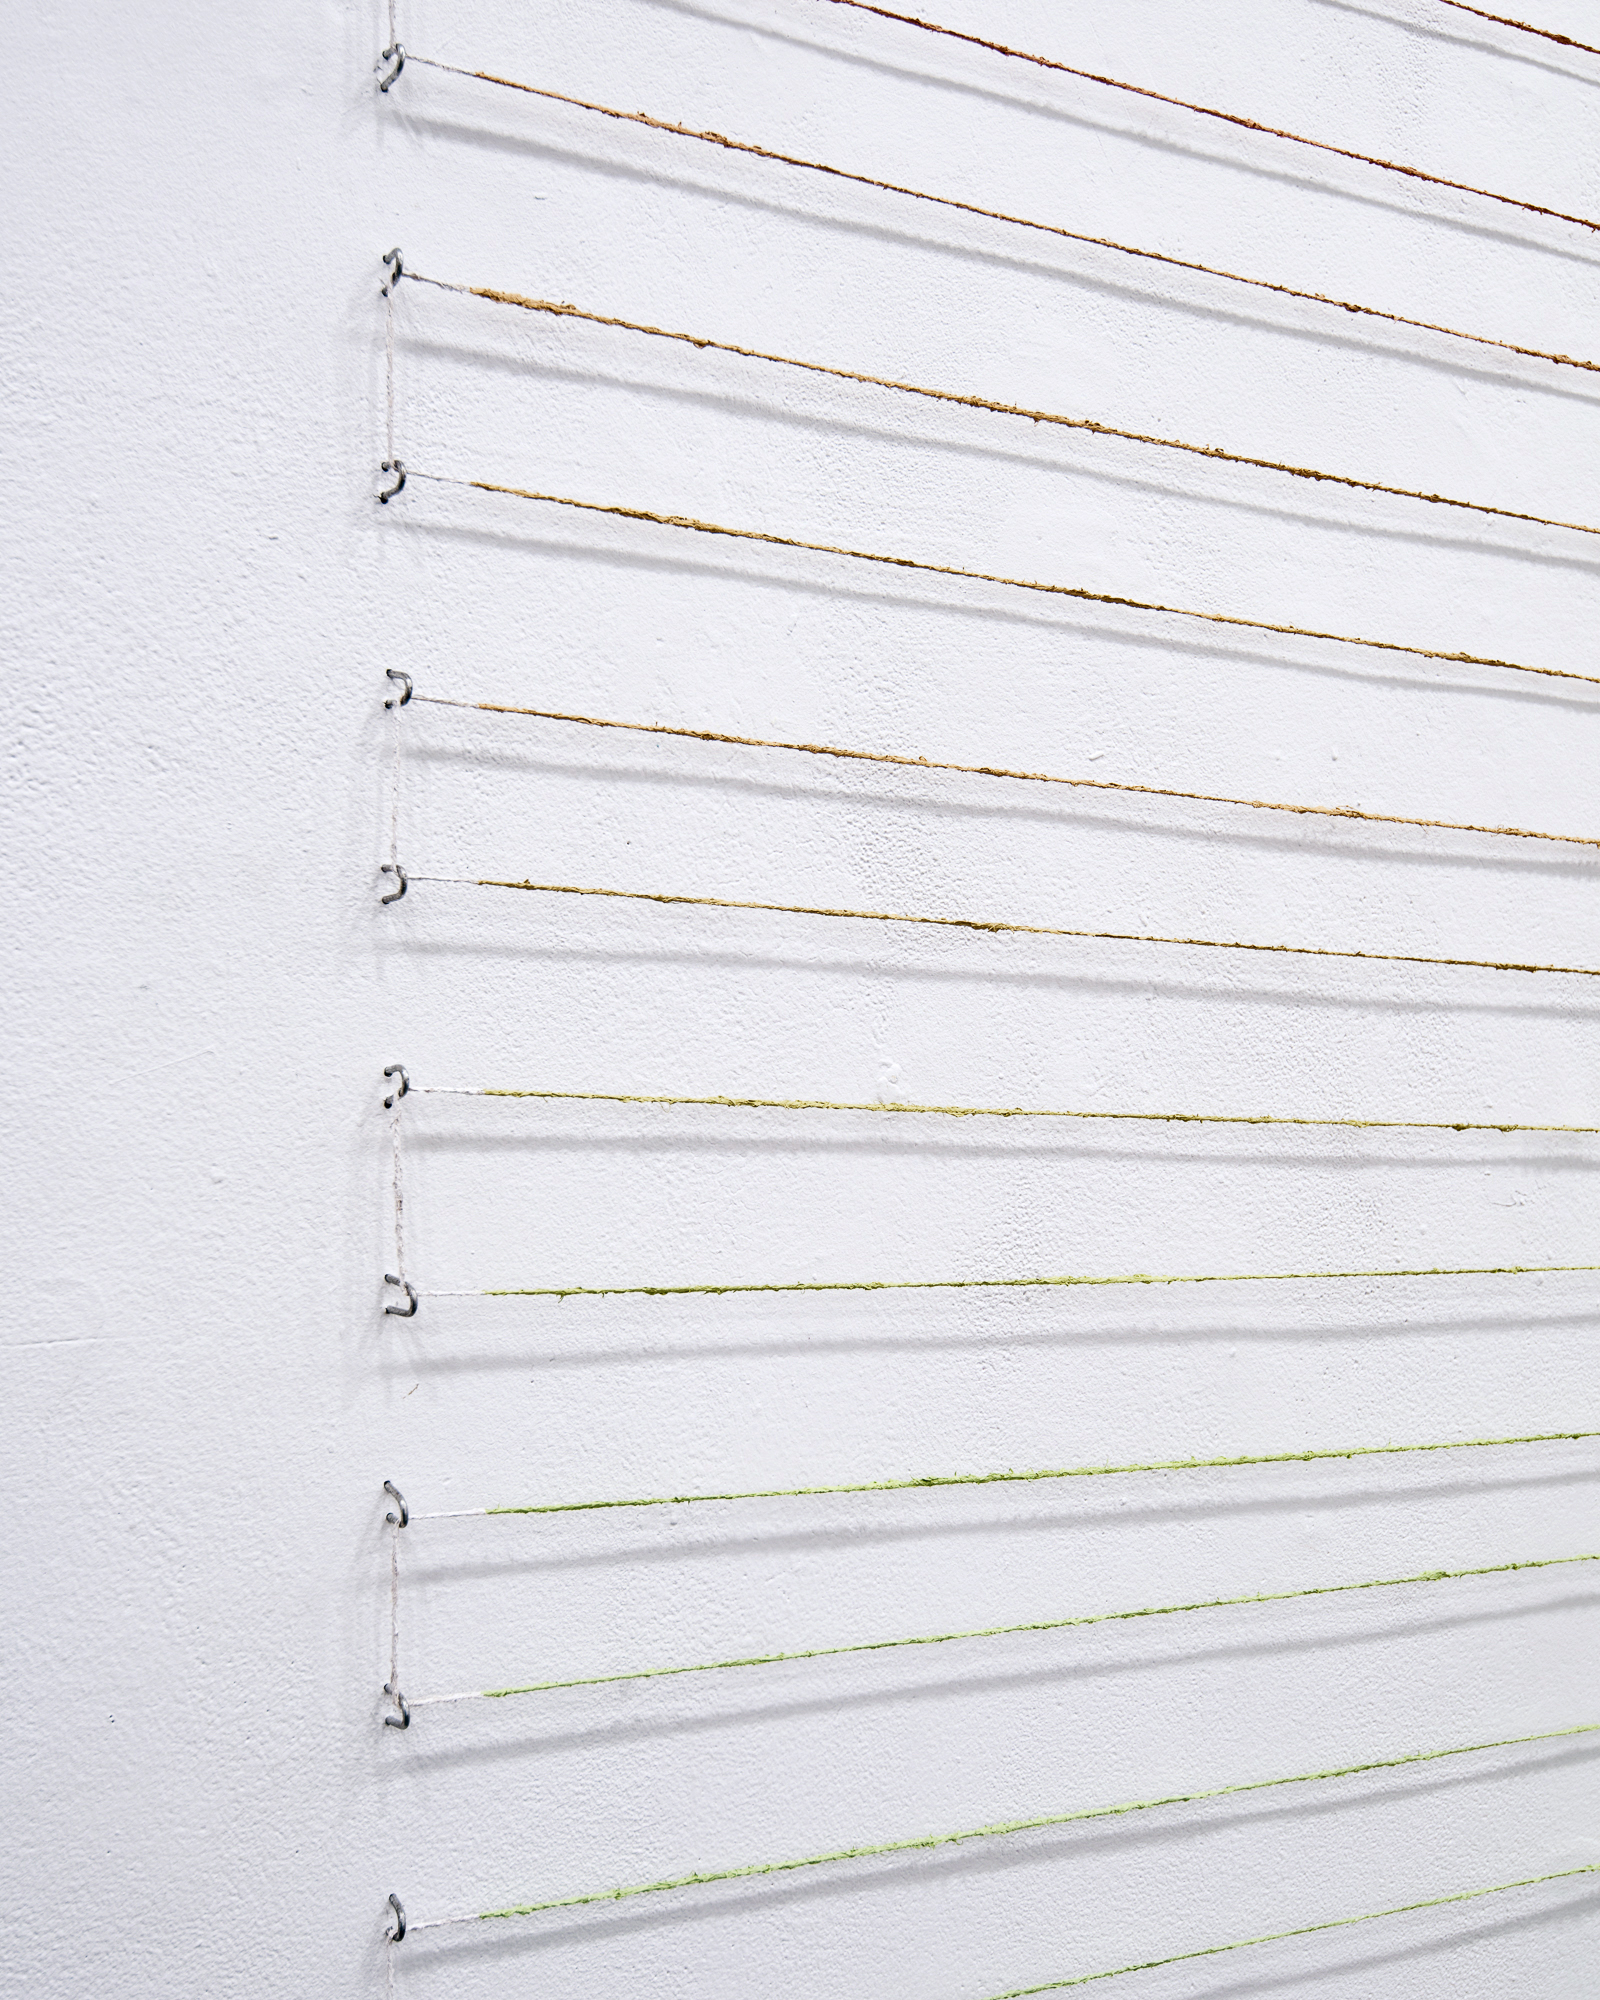   Four Hour Colour Index , 96"x120",&nbsp;acrylic paint on jute, fencing staples, 2016. Detail   The State of a Small Sky , Zavitiz Gallery, 2016  Documentation by Peter Denton 